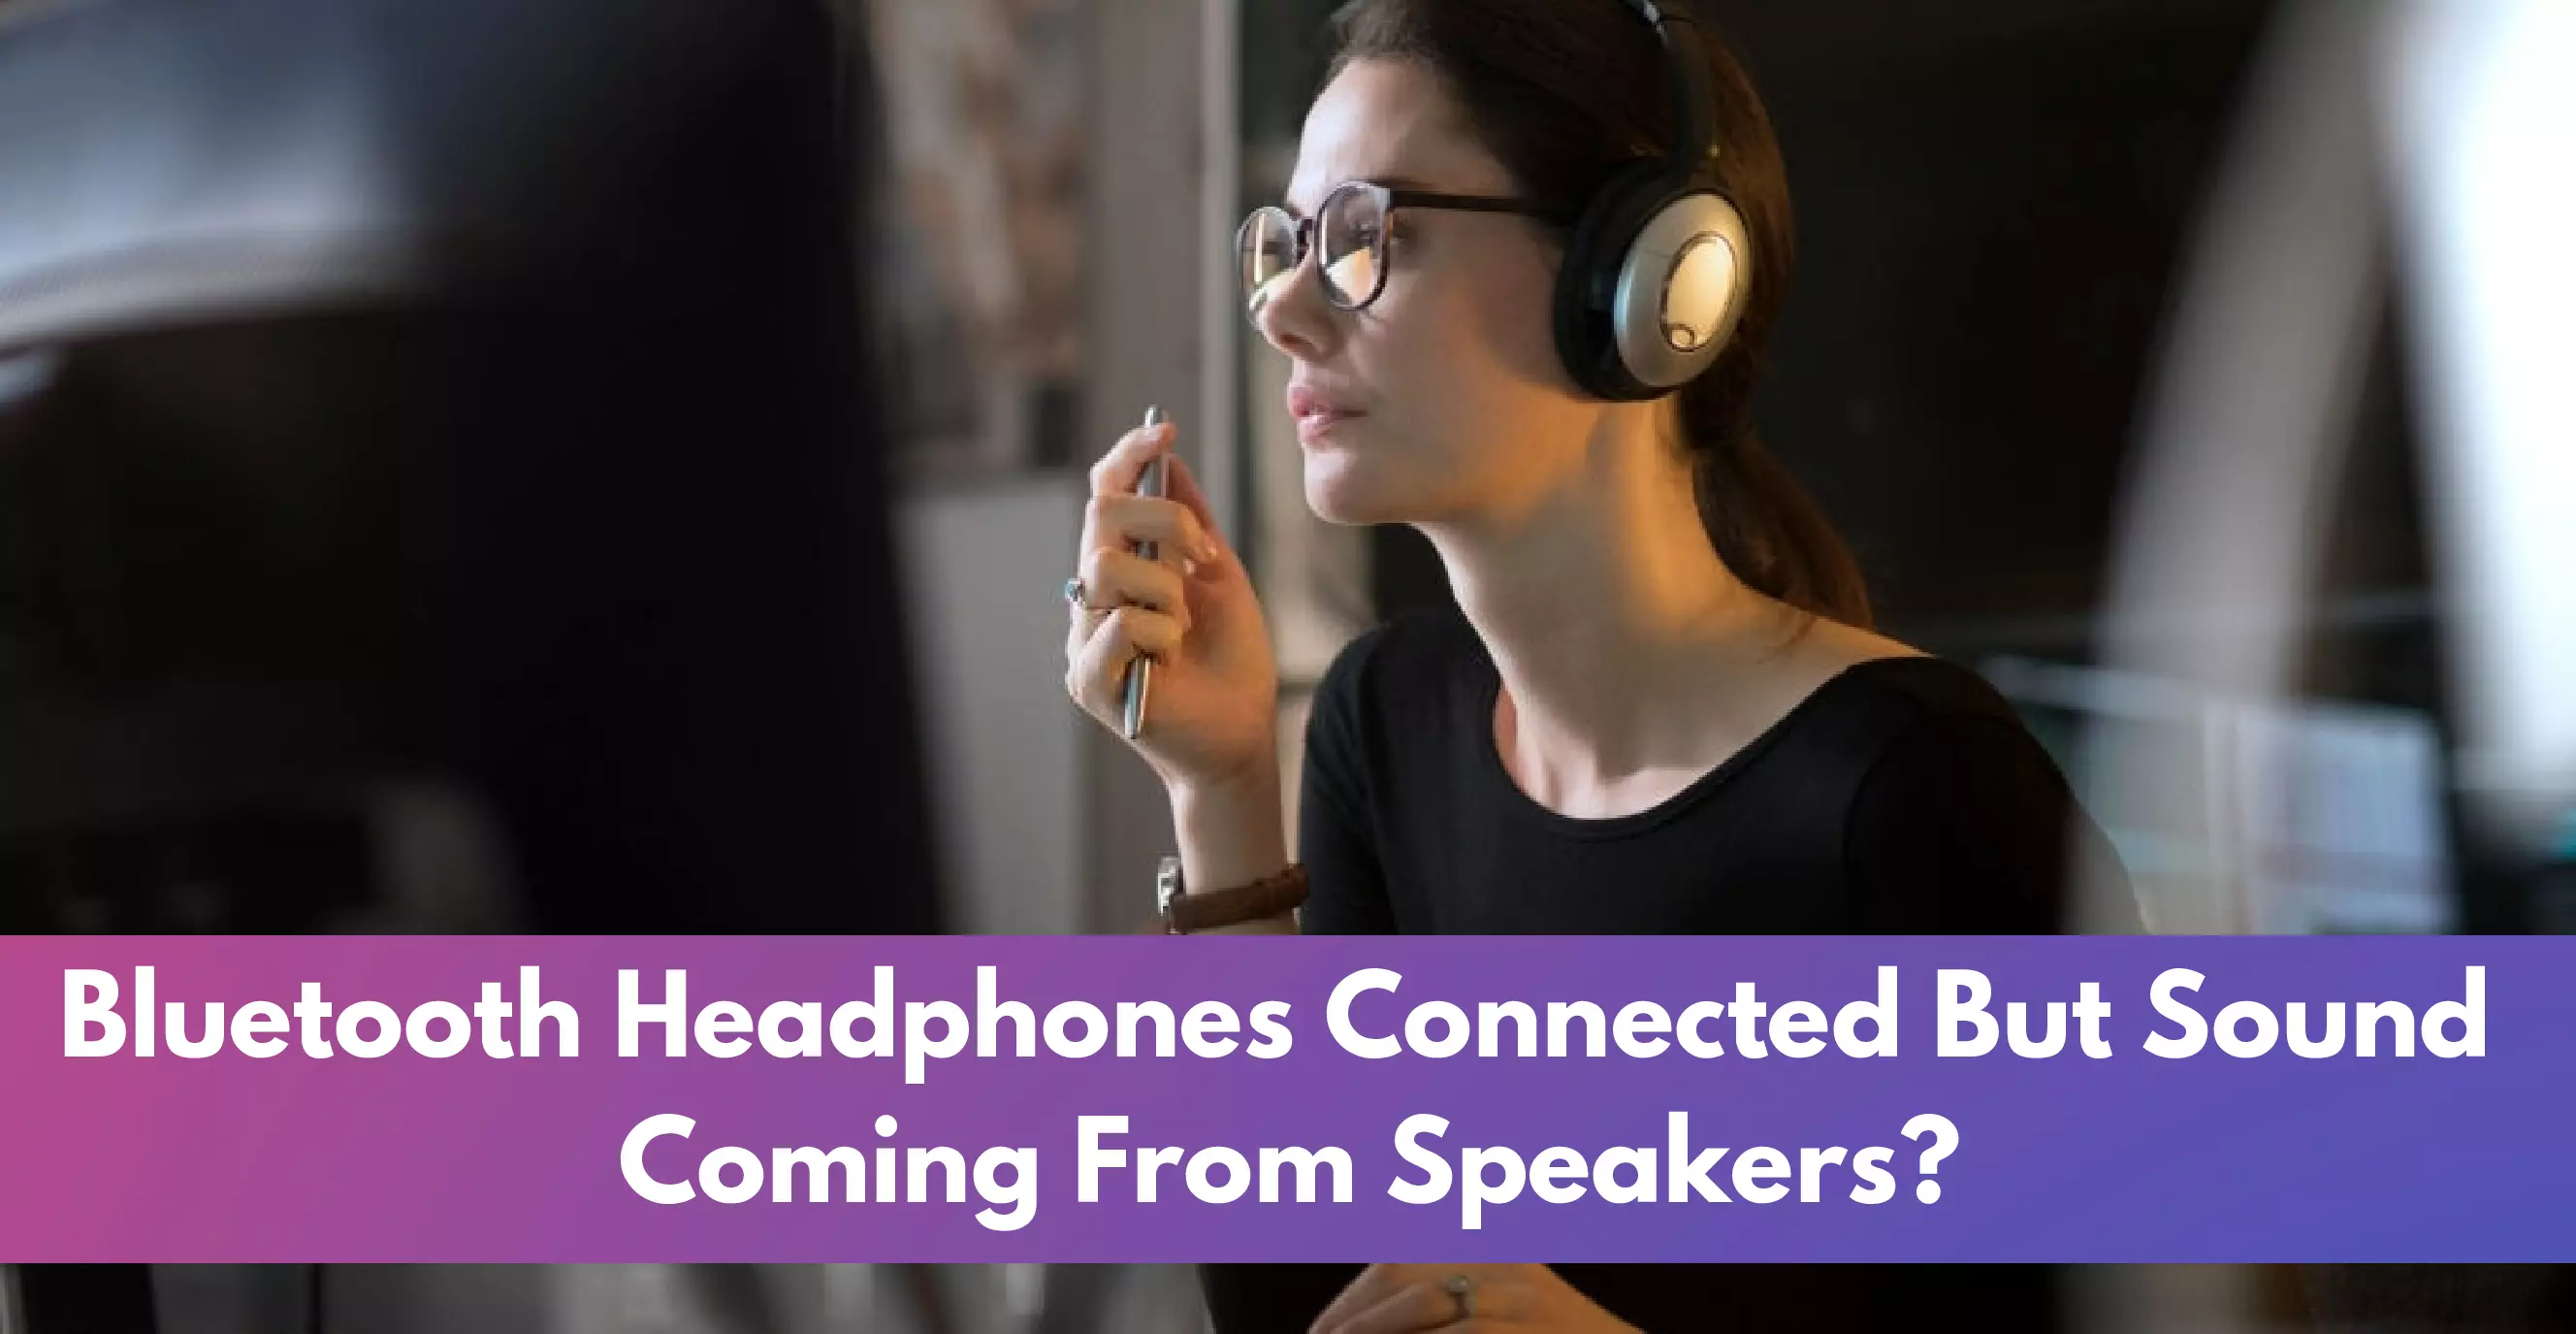 Bluetooth Headphones Connected But Sound Coming From Speakers